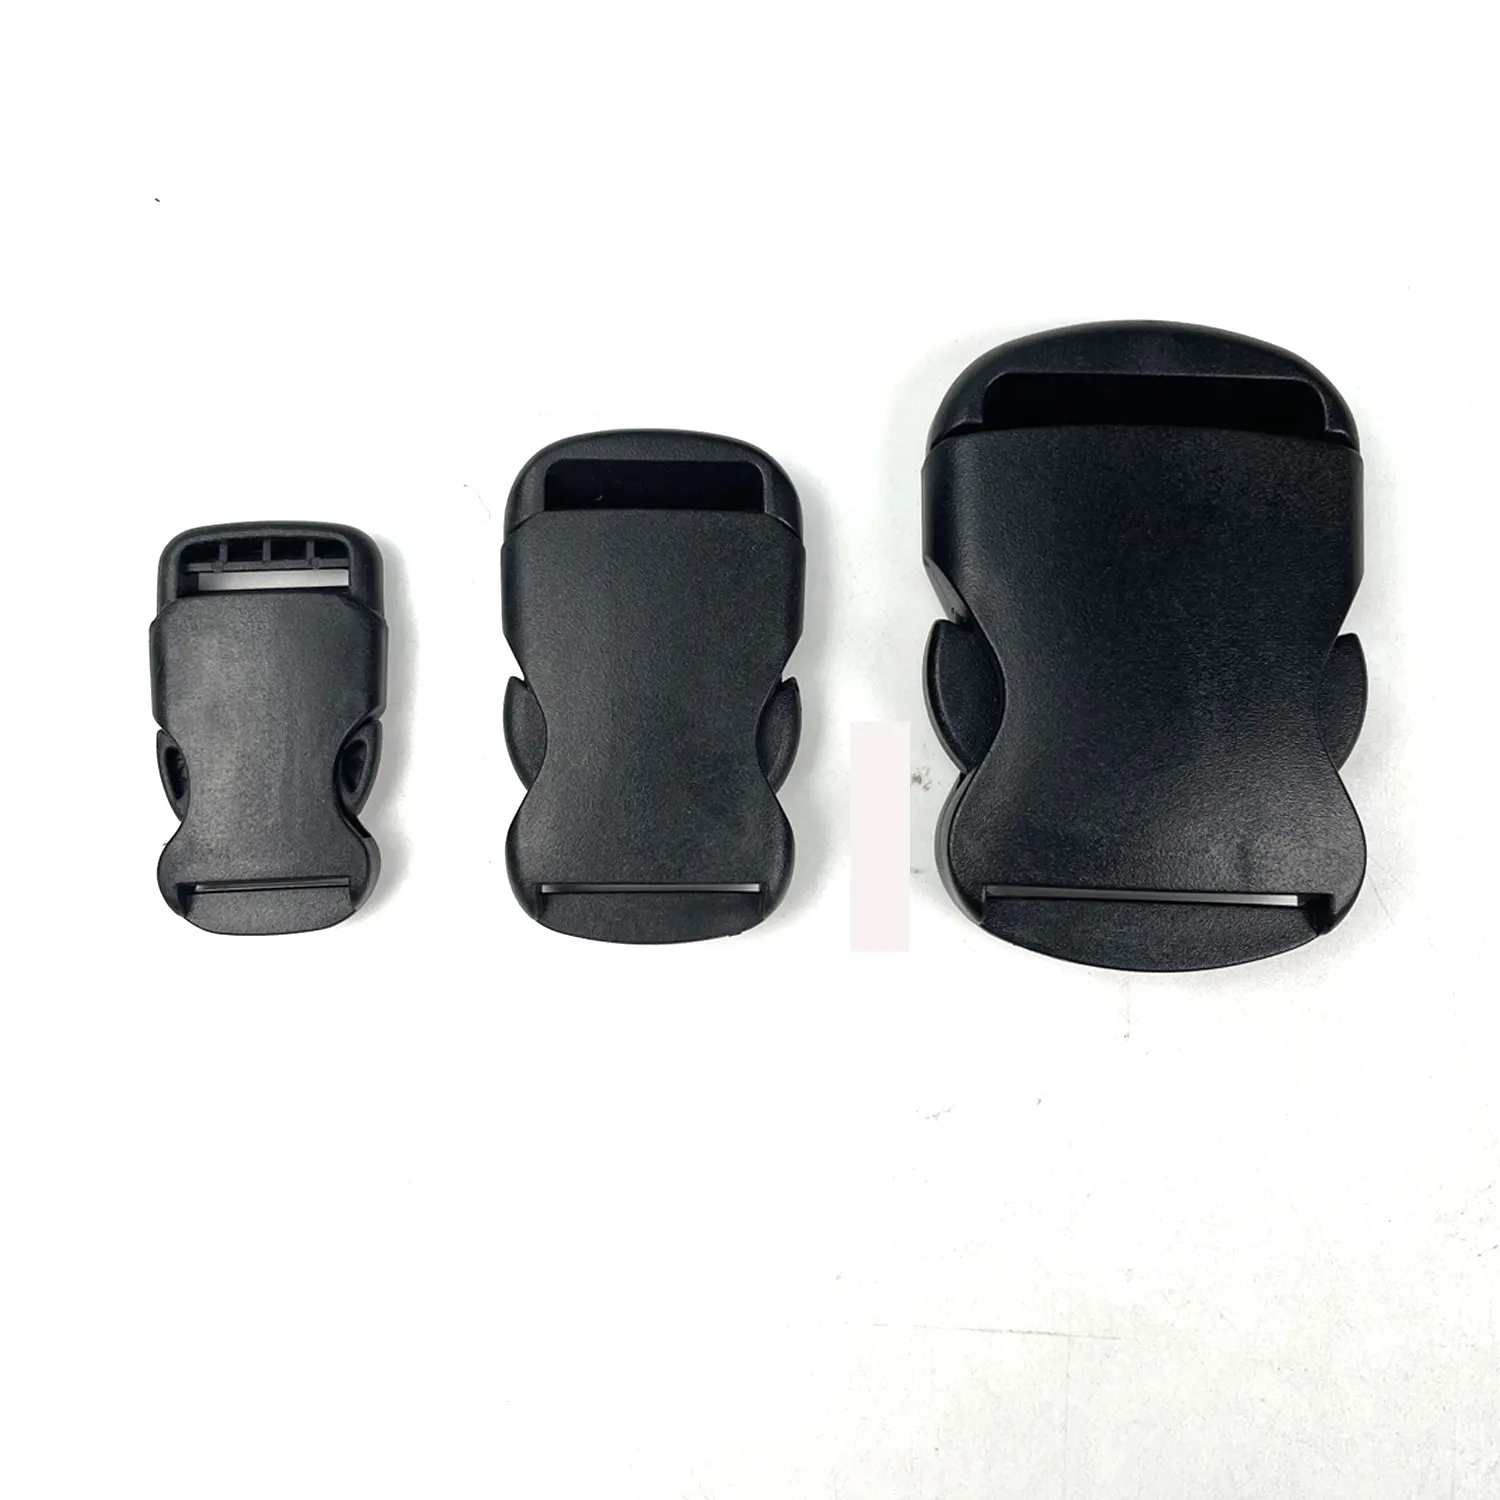 Nylon material belt buckle China factory security epaulette fastener buckle accessories plastic buckle